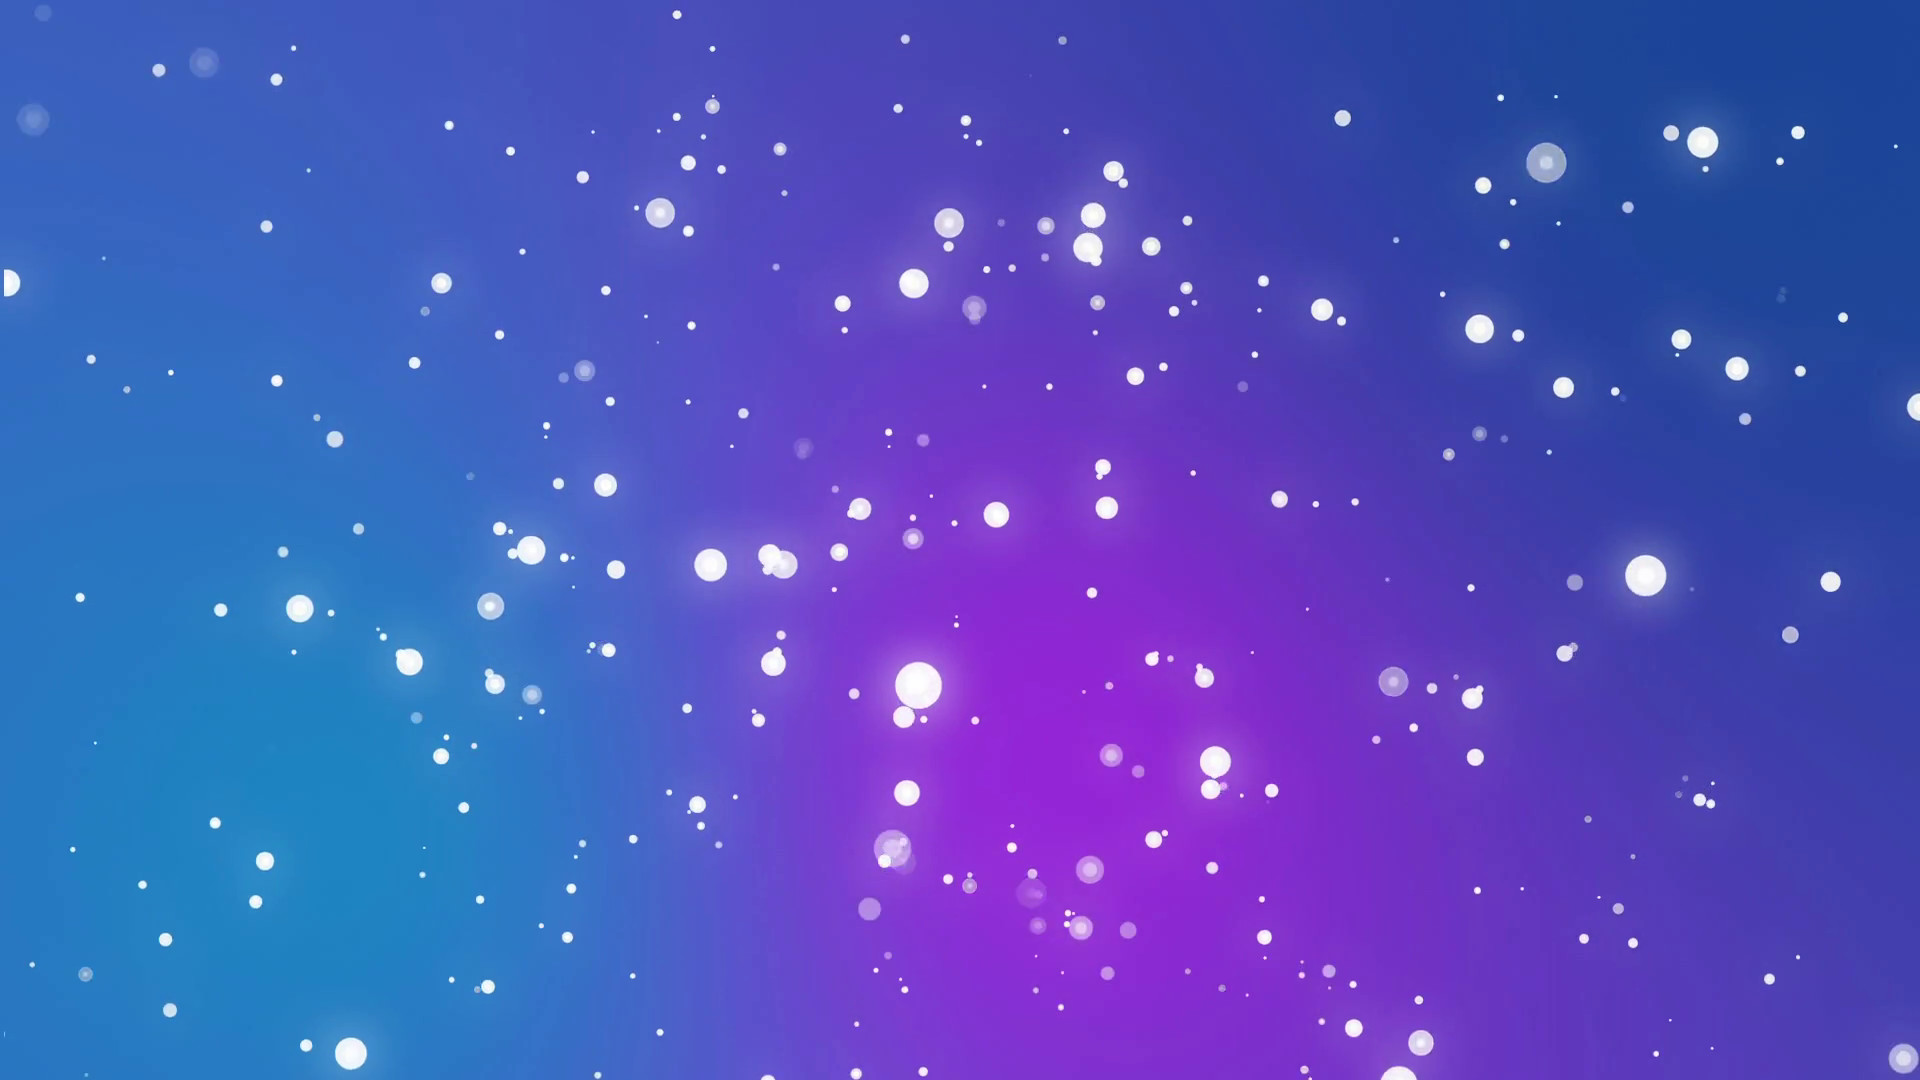 1920x1080 Fantasy purple blue gradient Christmas background with falling sparkly  white snowflakes